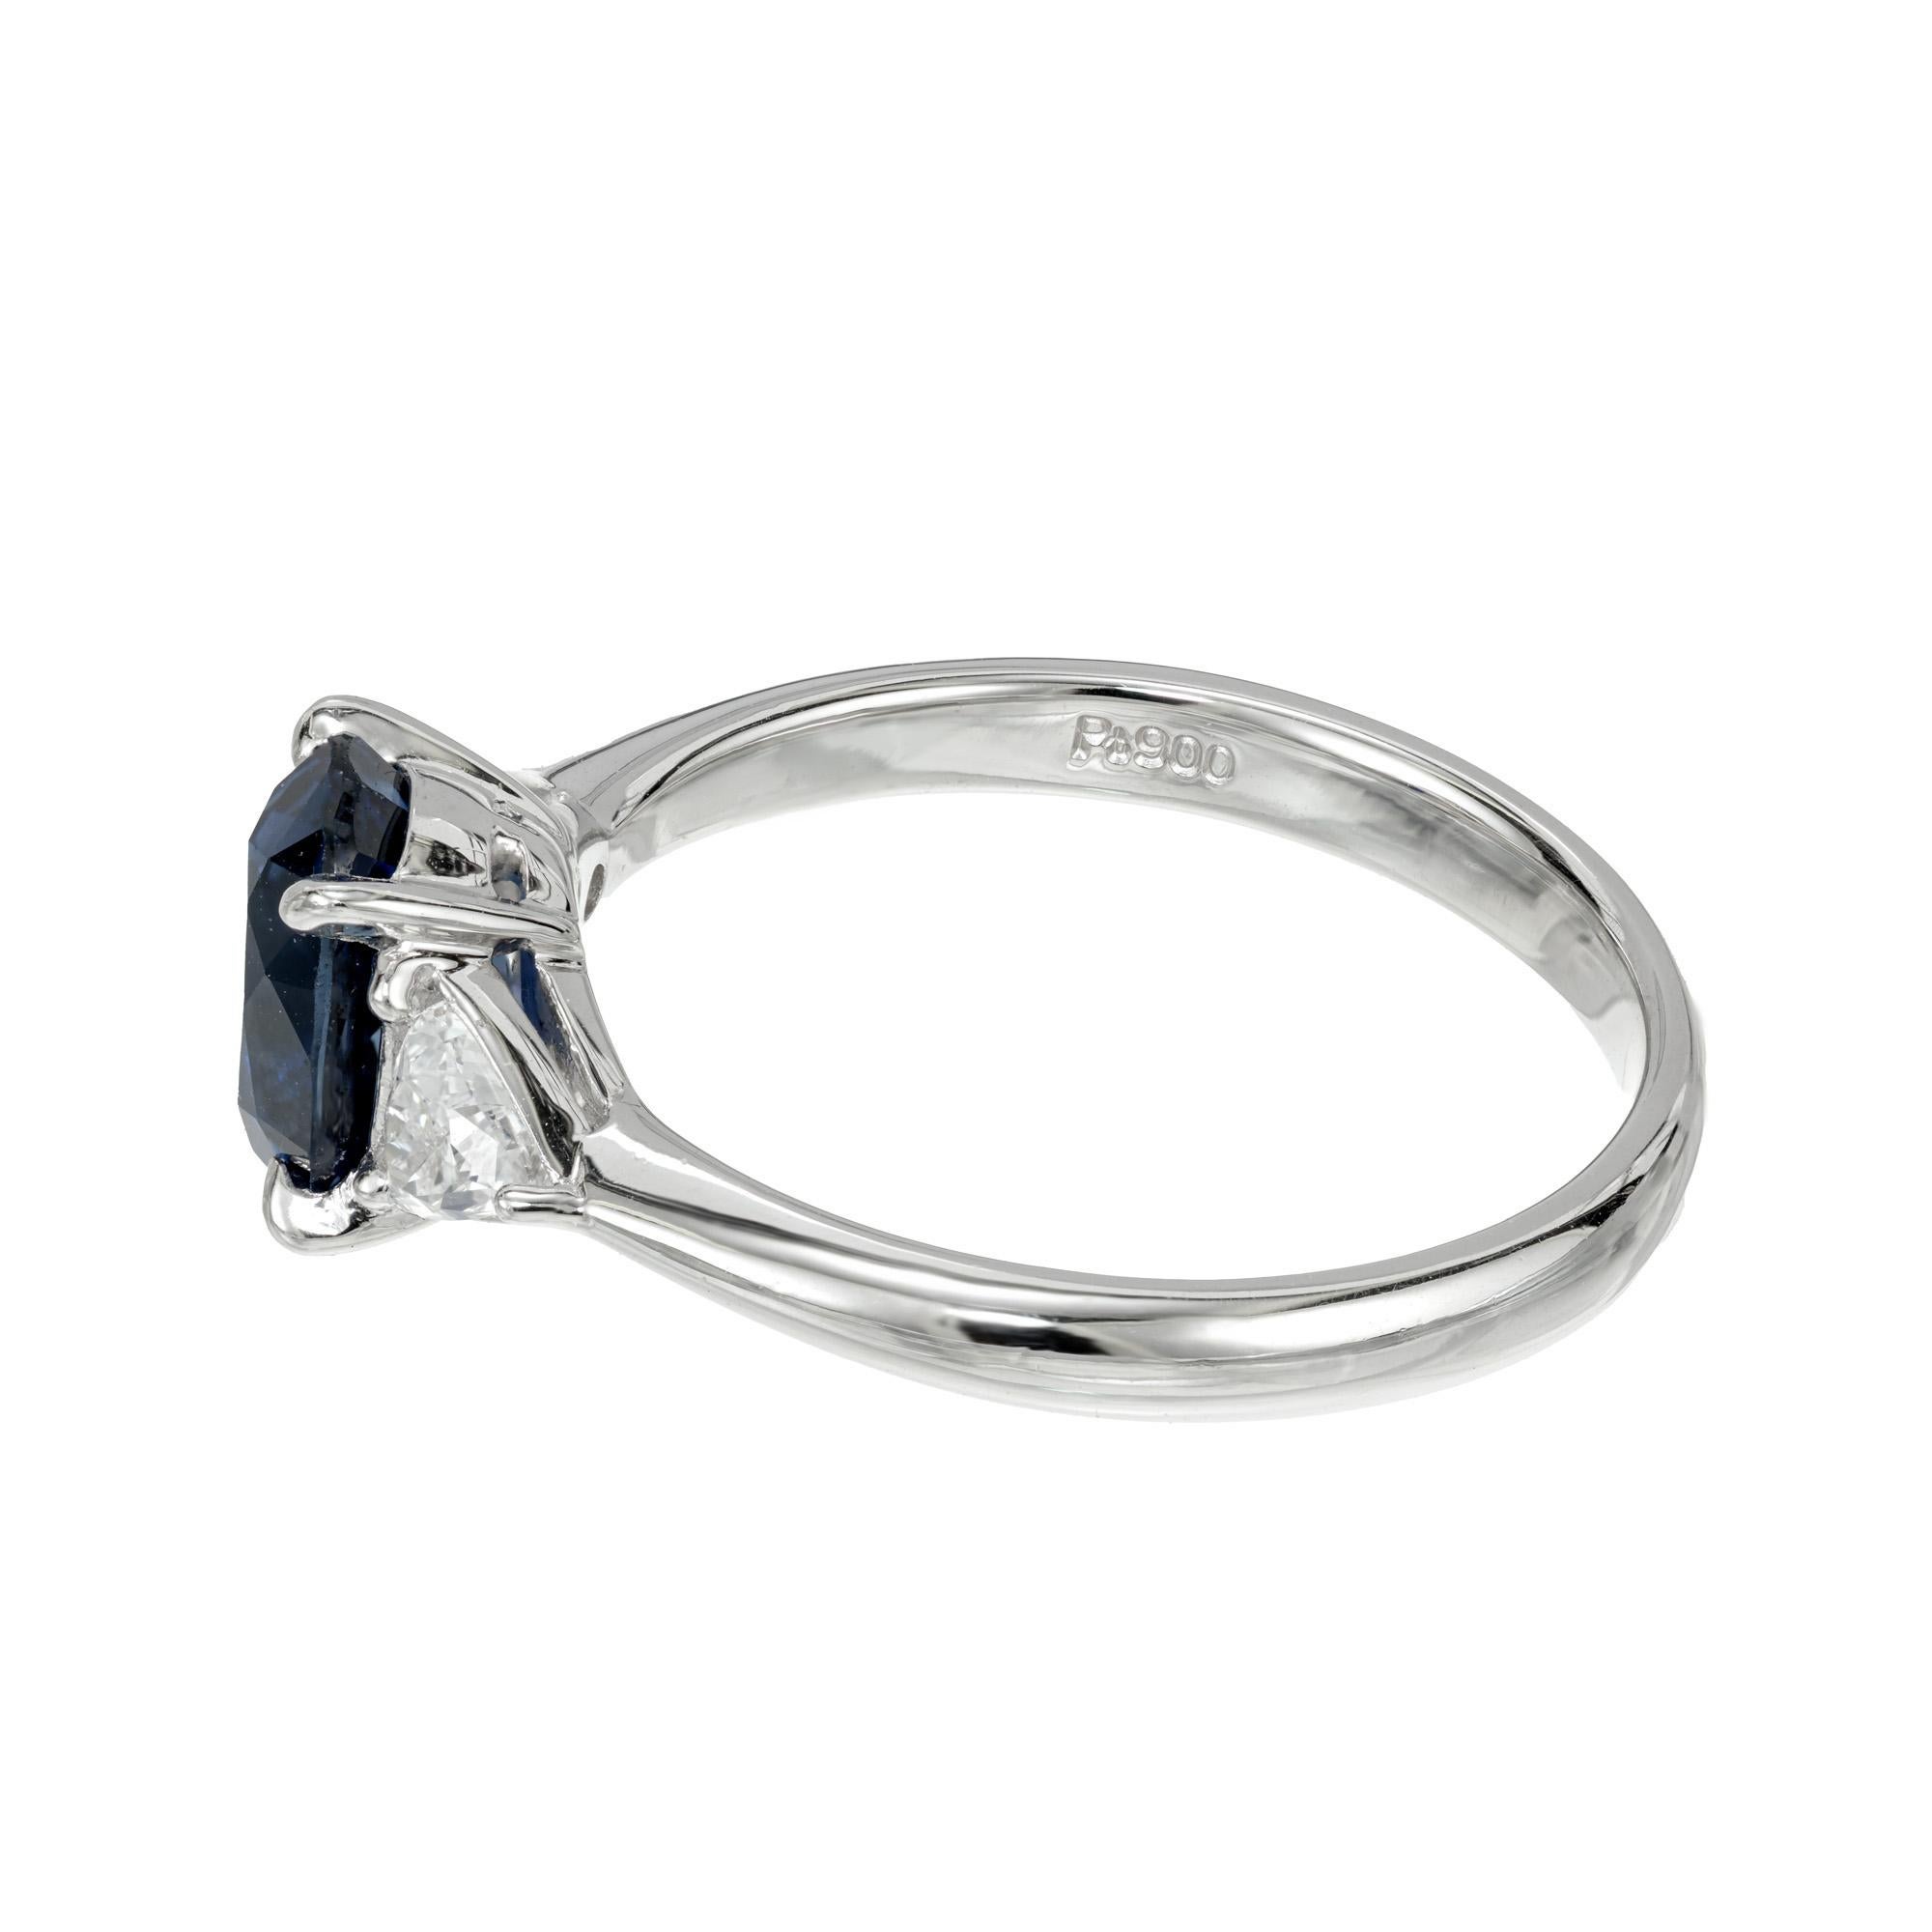 GIA Certified Oval 1.85 Carat Blue Sapphire Diamond Platinum Engagement Ring In Good Condition For Sale In Stamford, CT